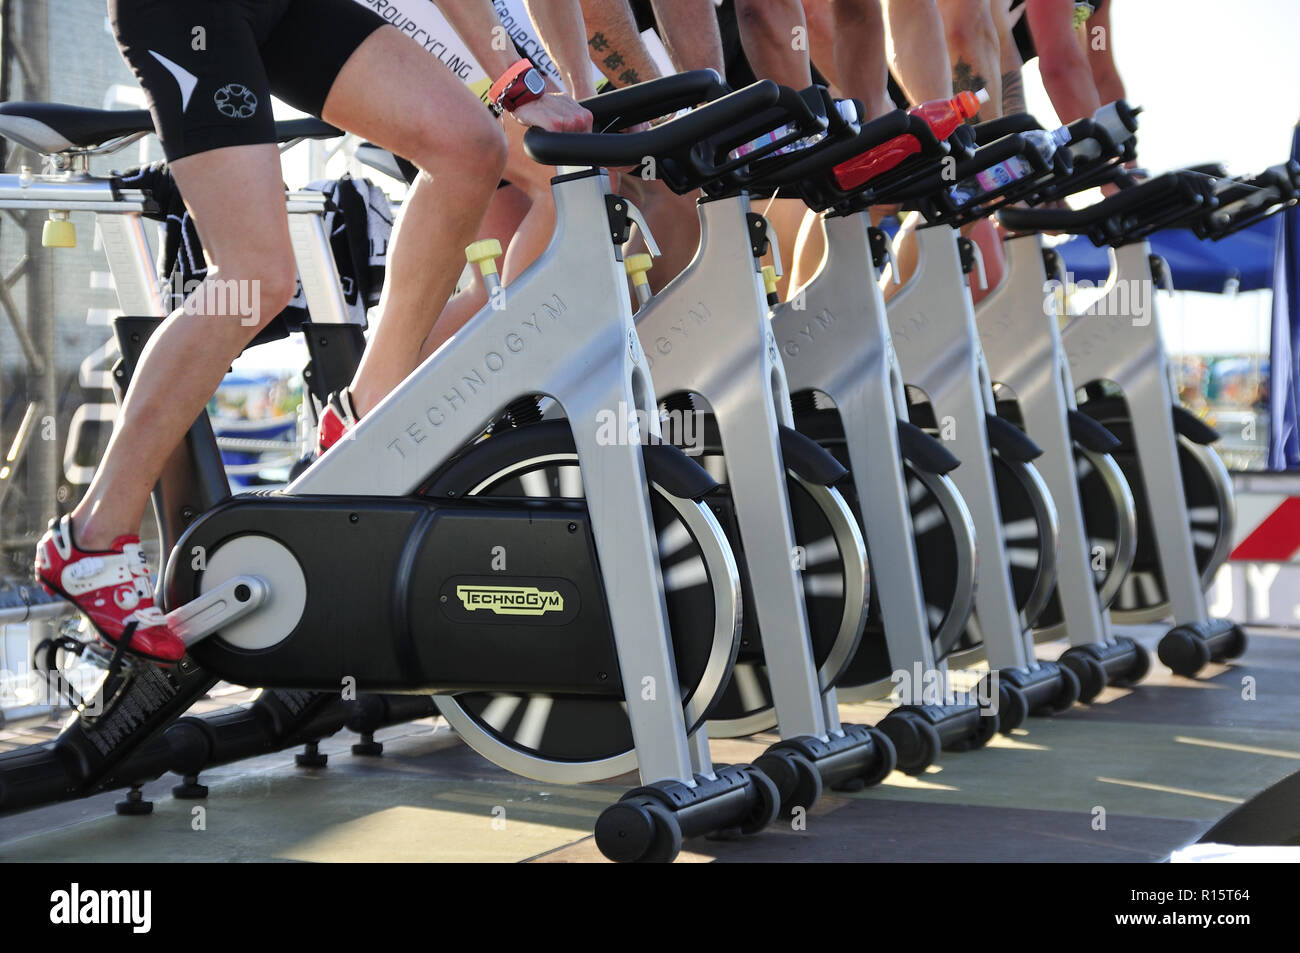 Cropped shot of spinning bikes. People working out on spinning bikes. Stock Photo